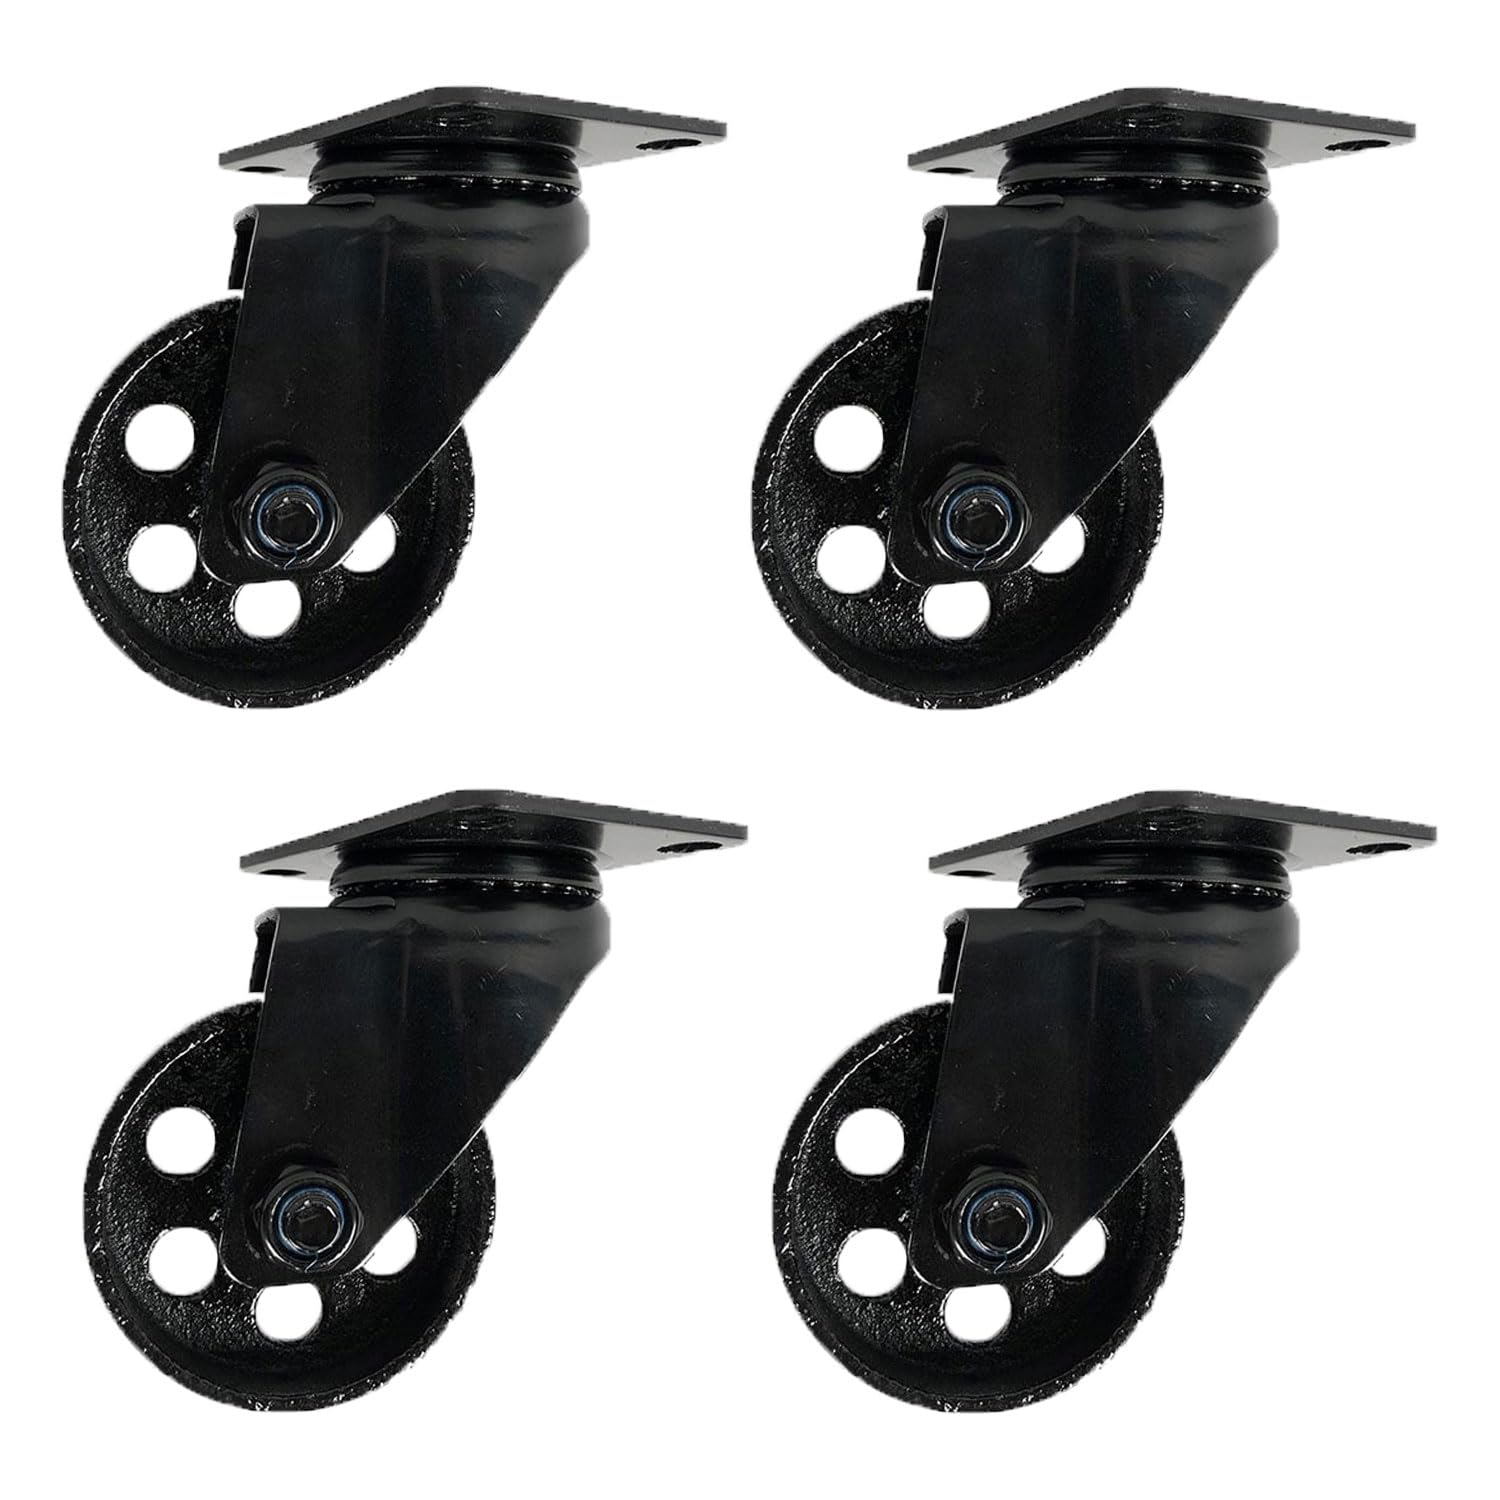 Osborne Heavy Duty Metal Caster Wheels (Set of Four), 3 7/8" H x 3 3/4" W, Black Swivel Industrial Vintage Wheels for Furniture, Carts, Islands, Chairs, Tables and Other Projects